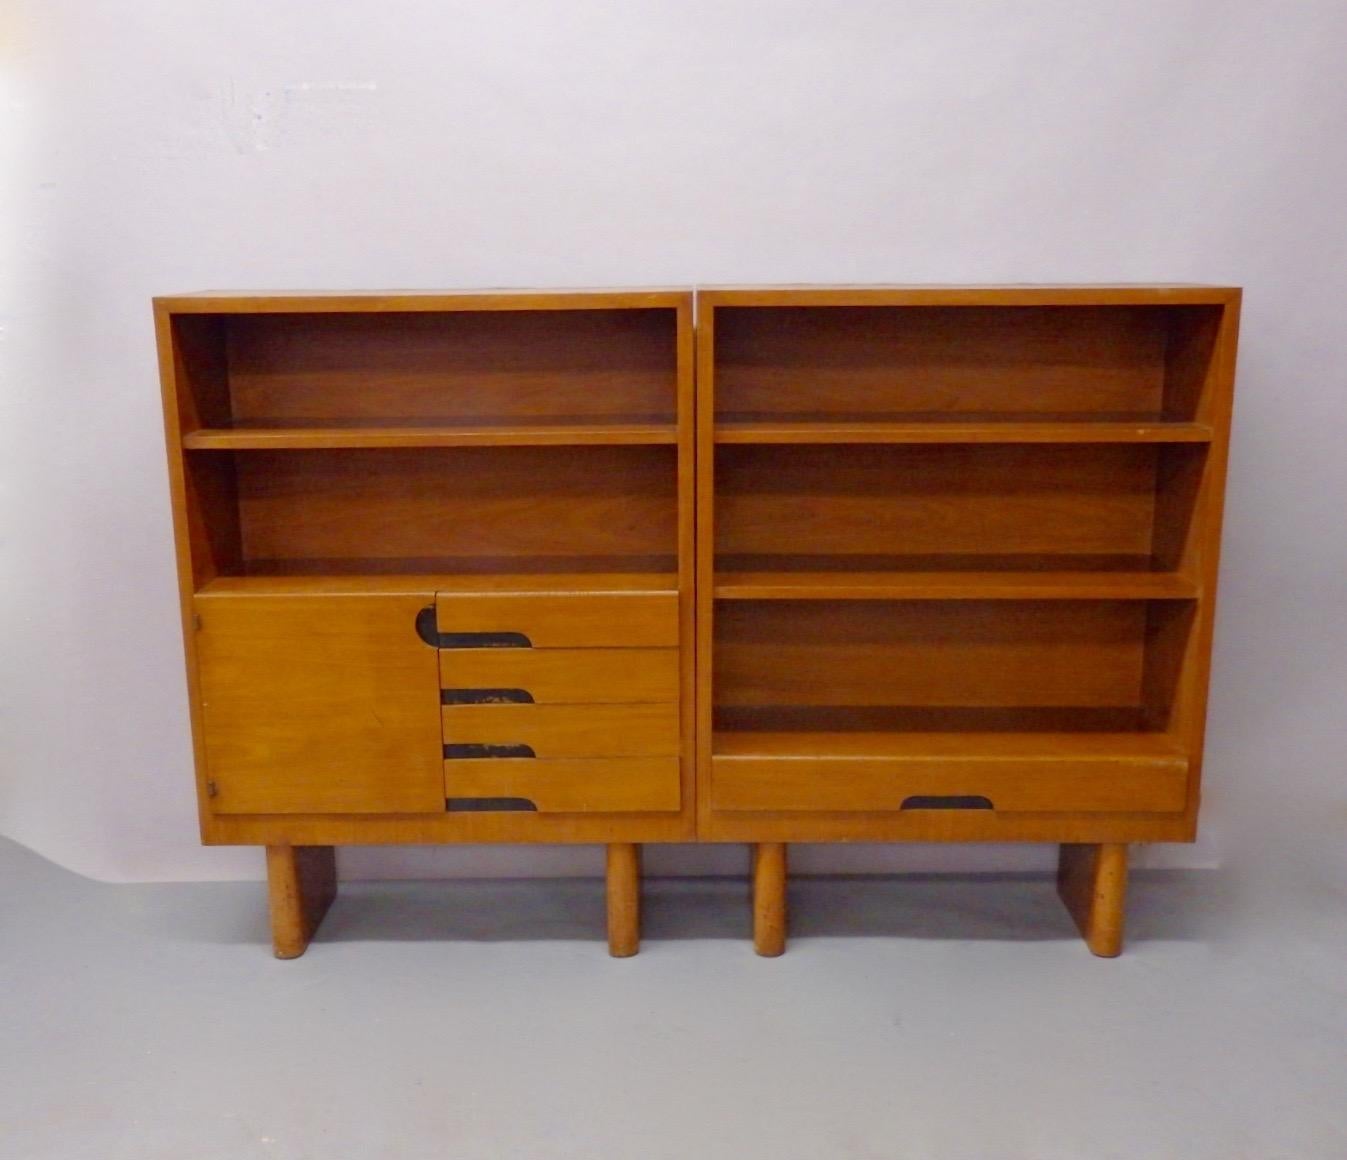 One of the earliest champions of modern design in the U.S. Gilbert Rohde brought the idea of modernism and modular suites of furniture for home and office to Herman Miller co. This is a classic example of Rohdes modularity. Three book shelf cabinets